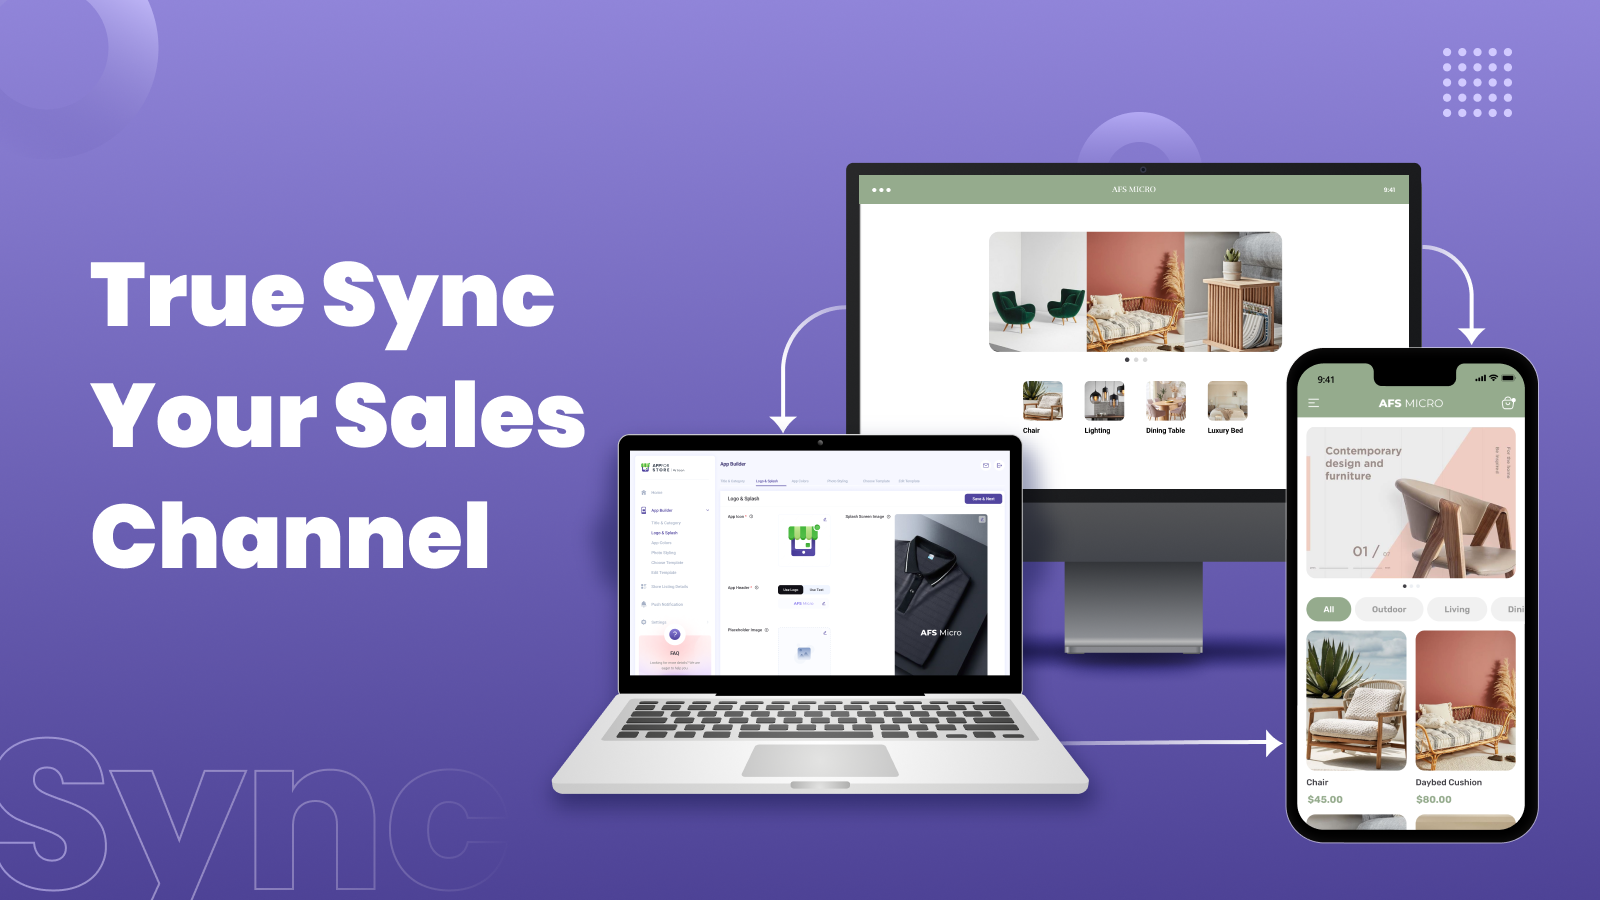 True sync your sales channel